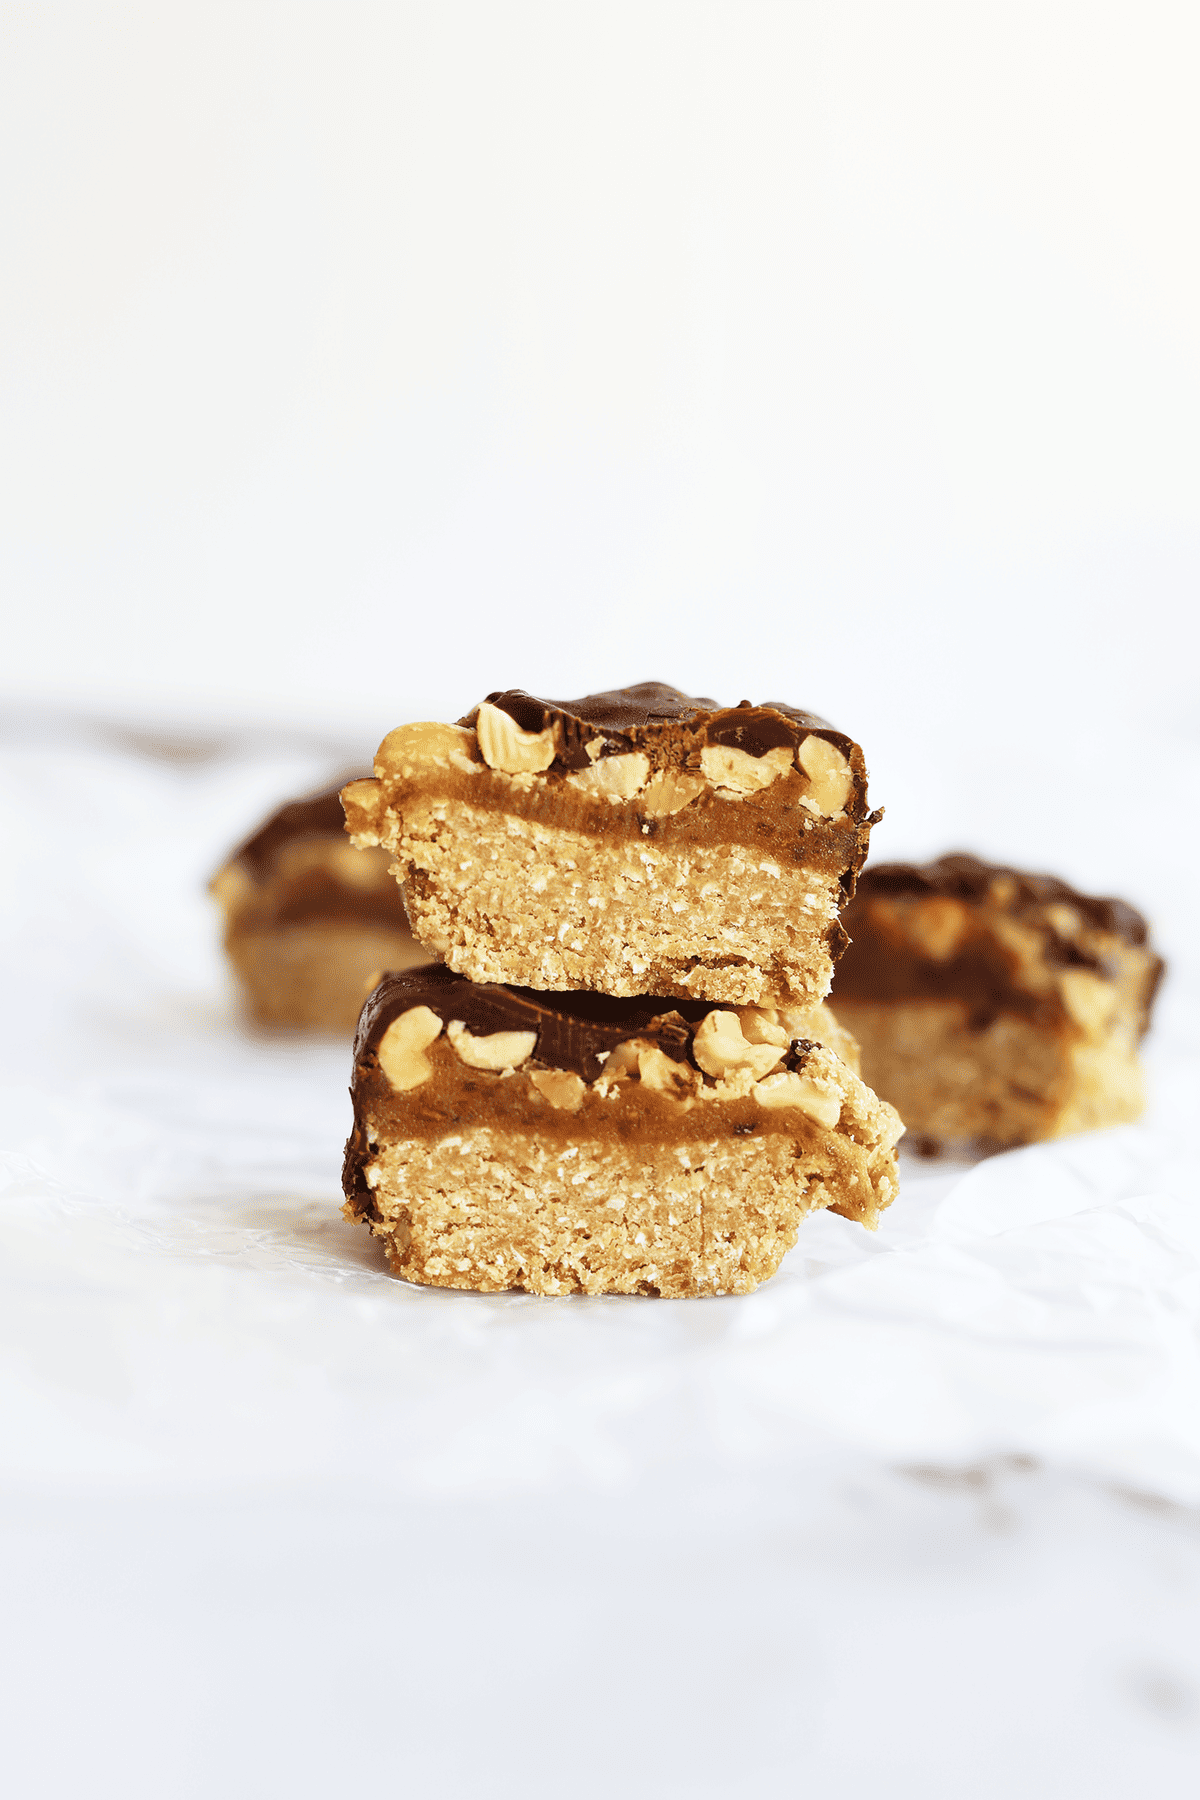  These Chocolate Caramel Peanut Butter Bars taste just like a homemade snickers! They’re also vegan, gluten free, refined sugar free and no baking required. 